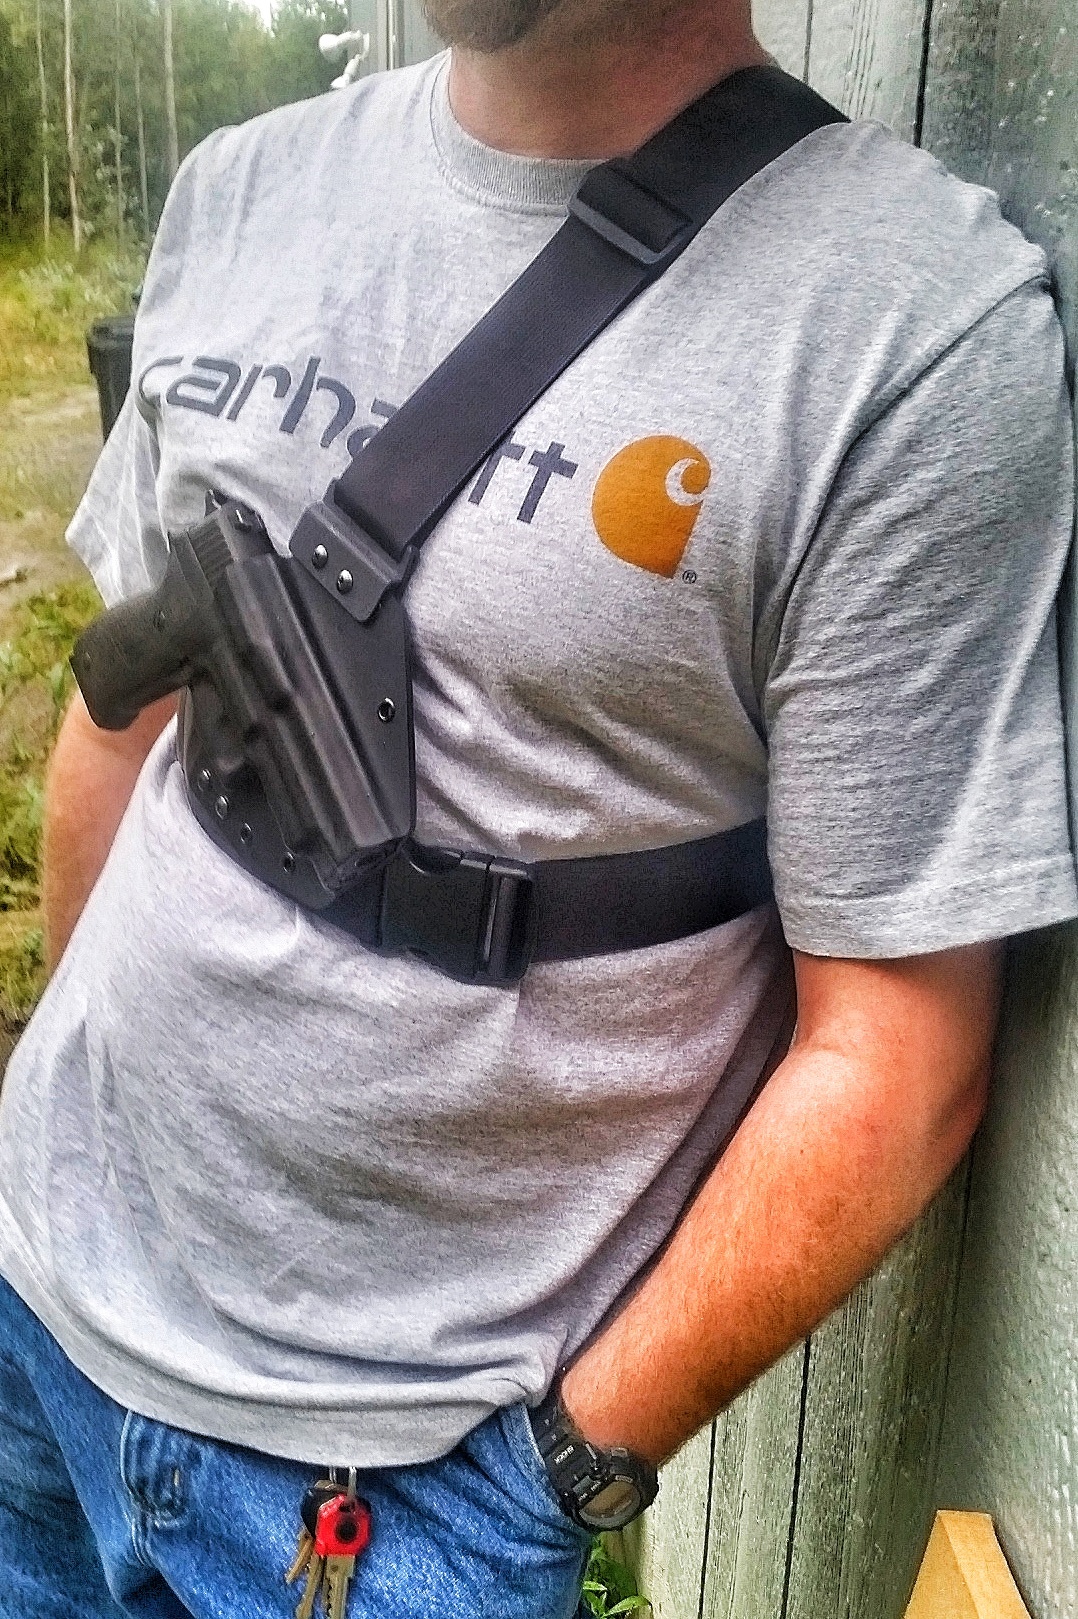 Susitna Chest Holster - Alaska's number one chest carry system